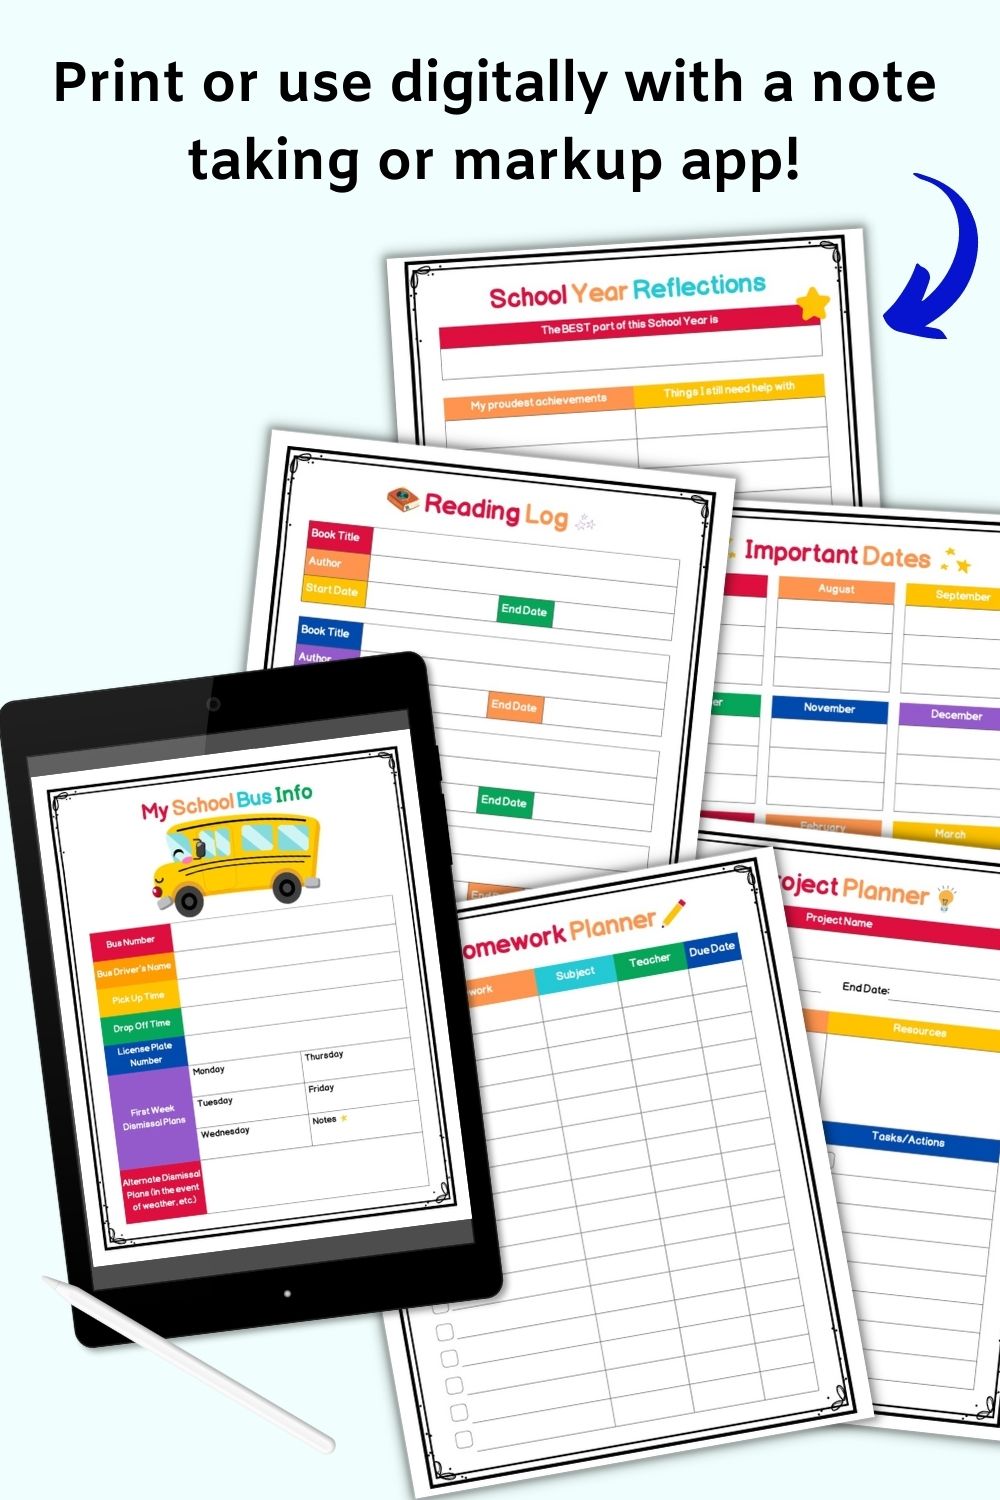 A mockup showing using a printable children's planner with a tablet